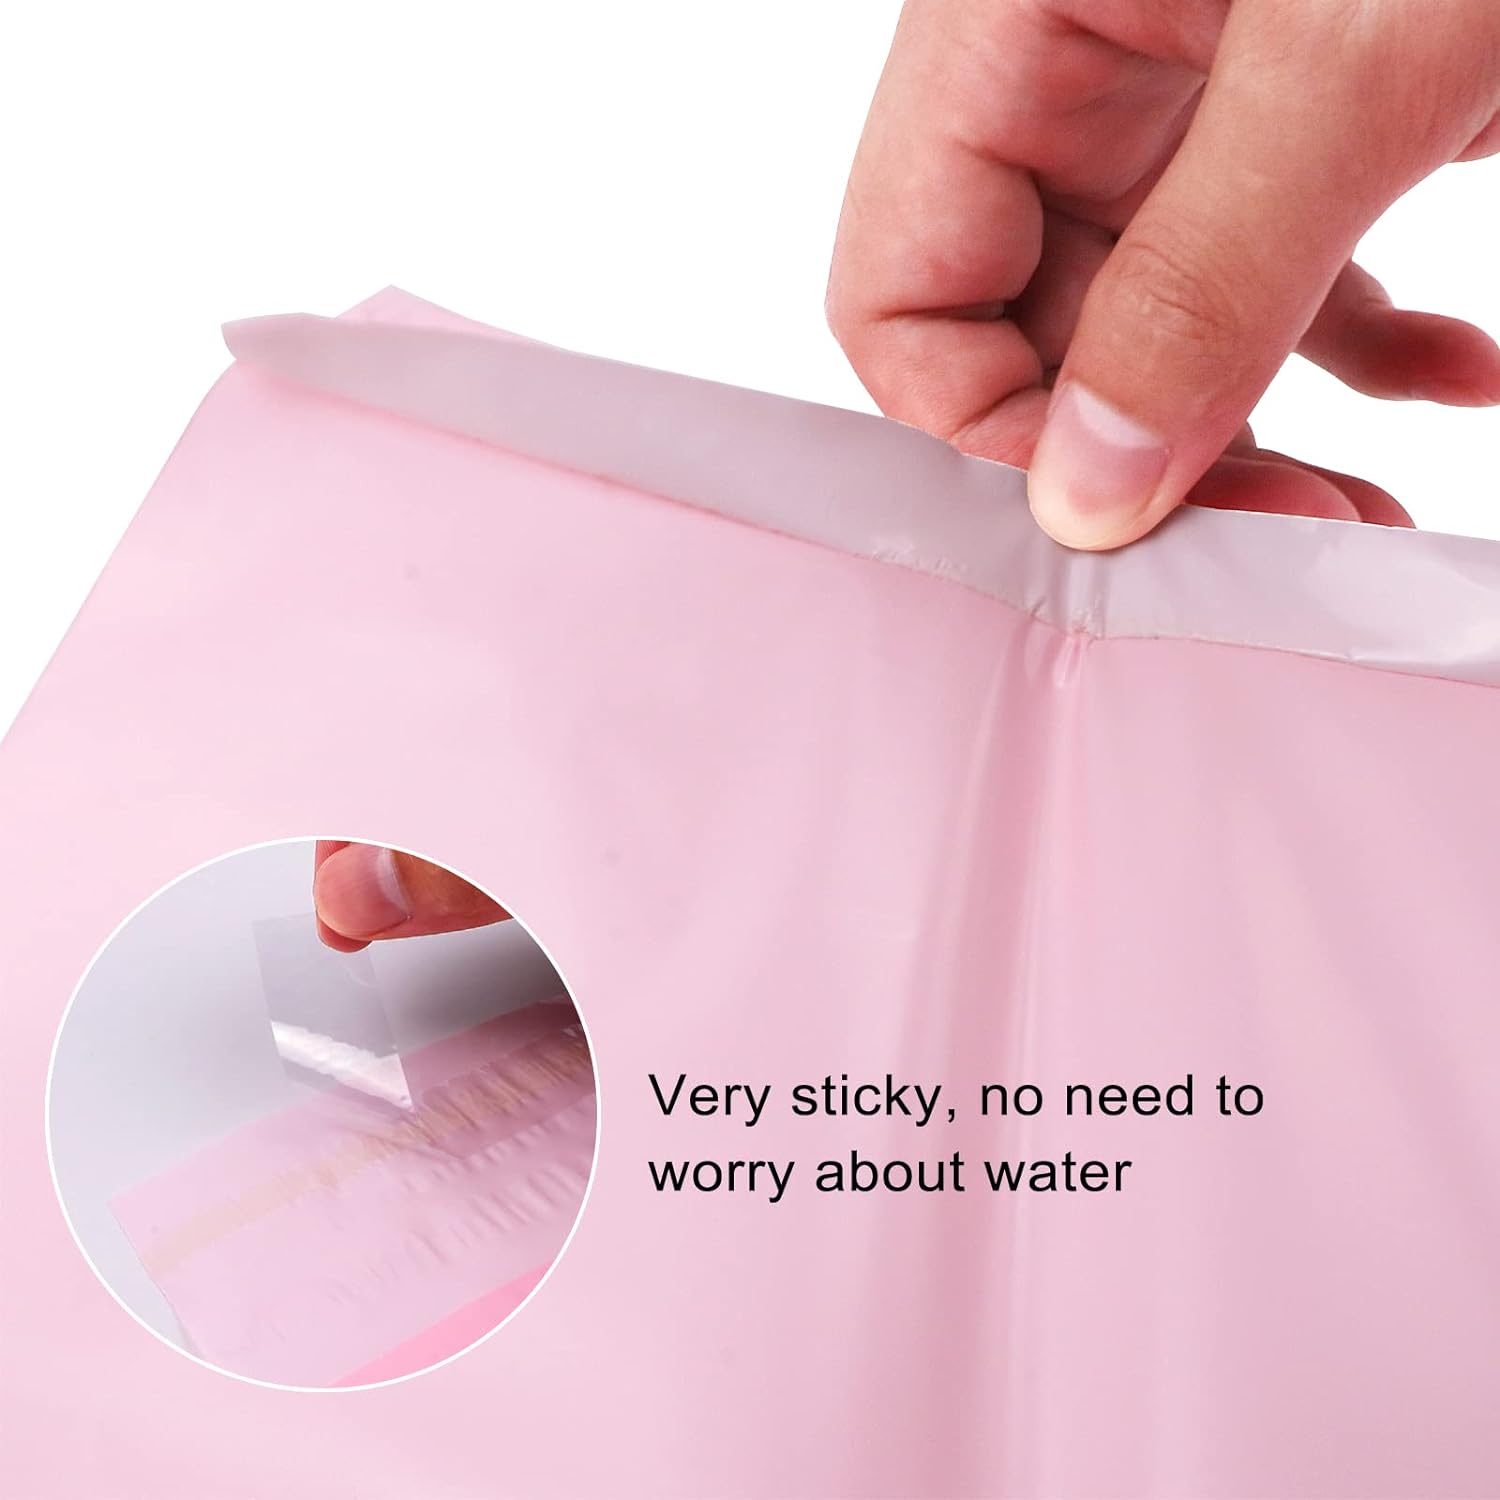 Hipruict Personal Disposal Bags, Set of 100 Sanitary Napkin Disposal Bags, Hide Personal Items, Self Sealing Bag to Seal Smell, Beautiful Light Pink Color, Suitable for Sanitary Napkin (Light Pink) : Health & Household